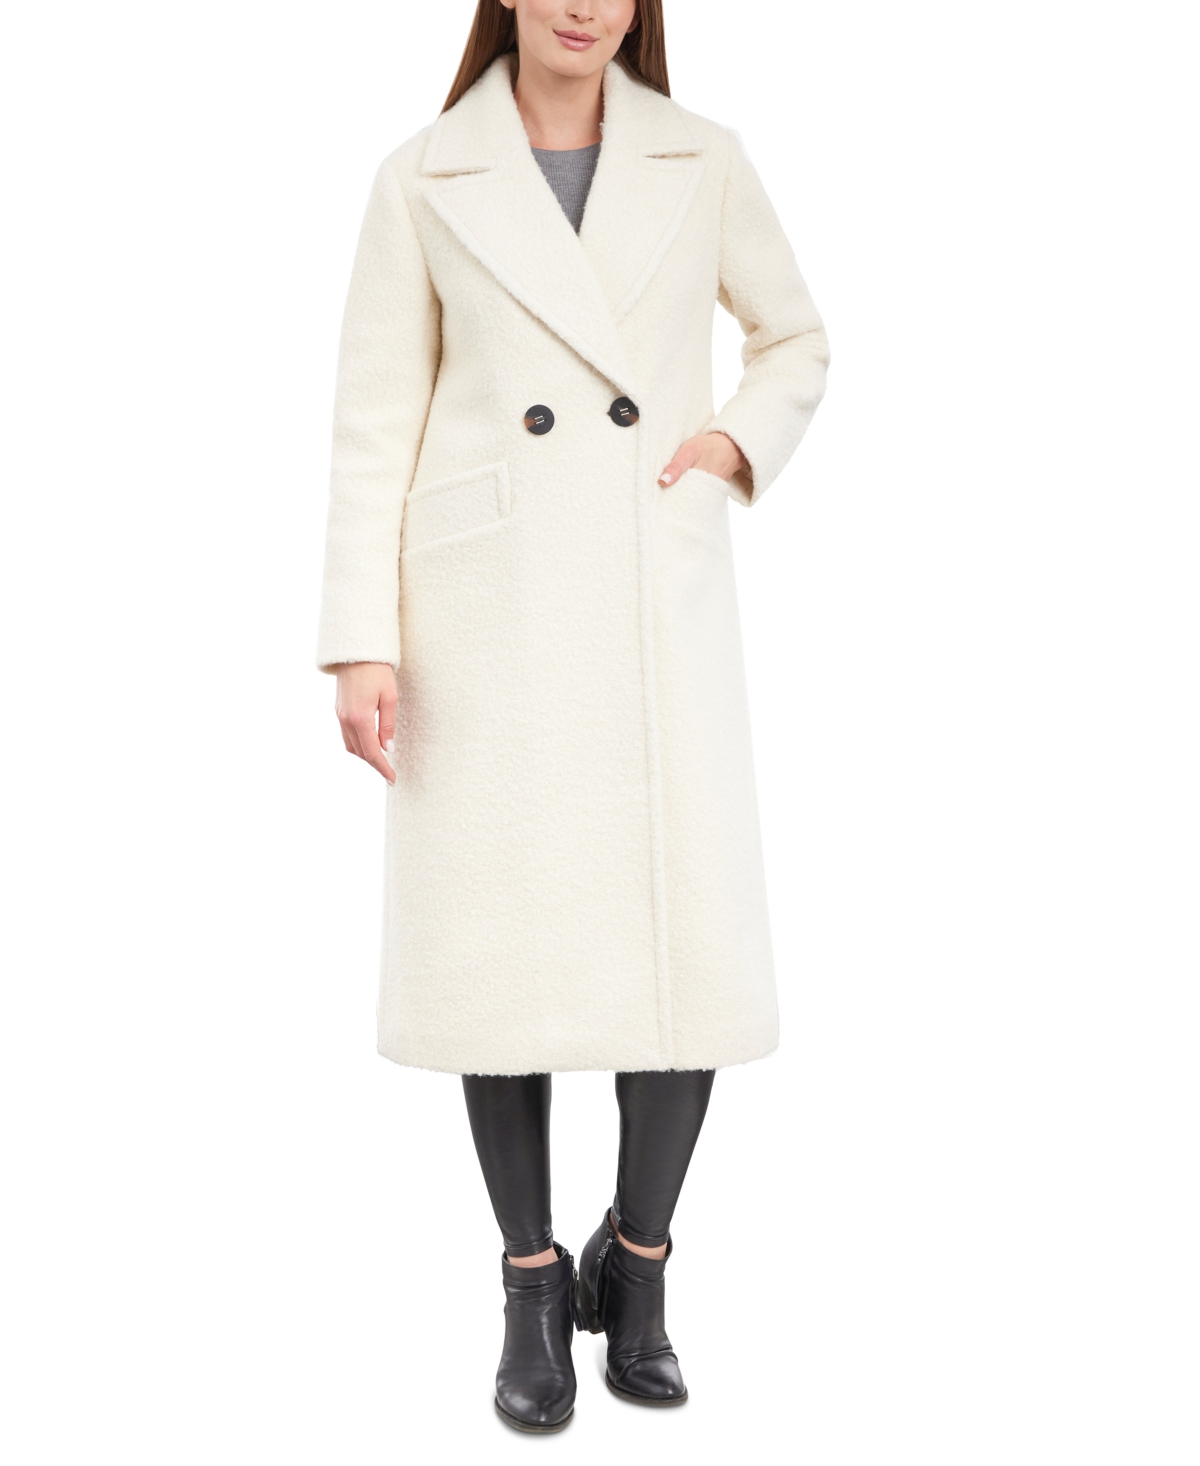 BCBGENERATION WOMEN'S DOUBLE-BREASTED BOUCLE COAT